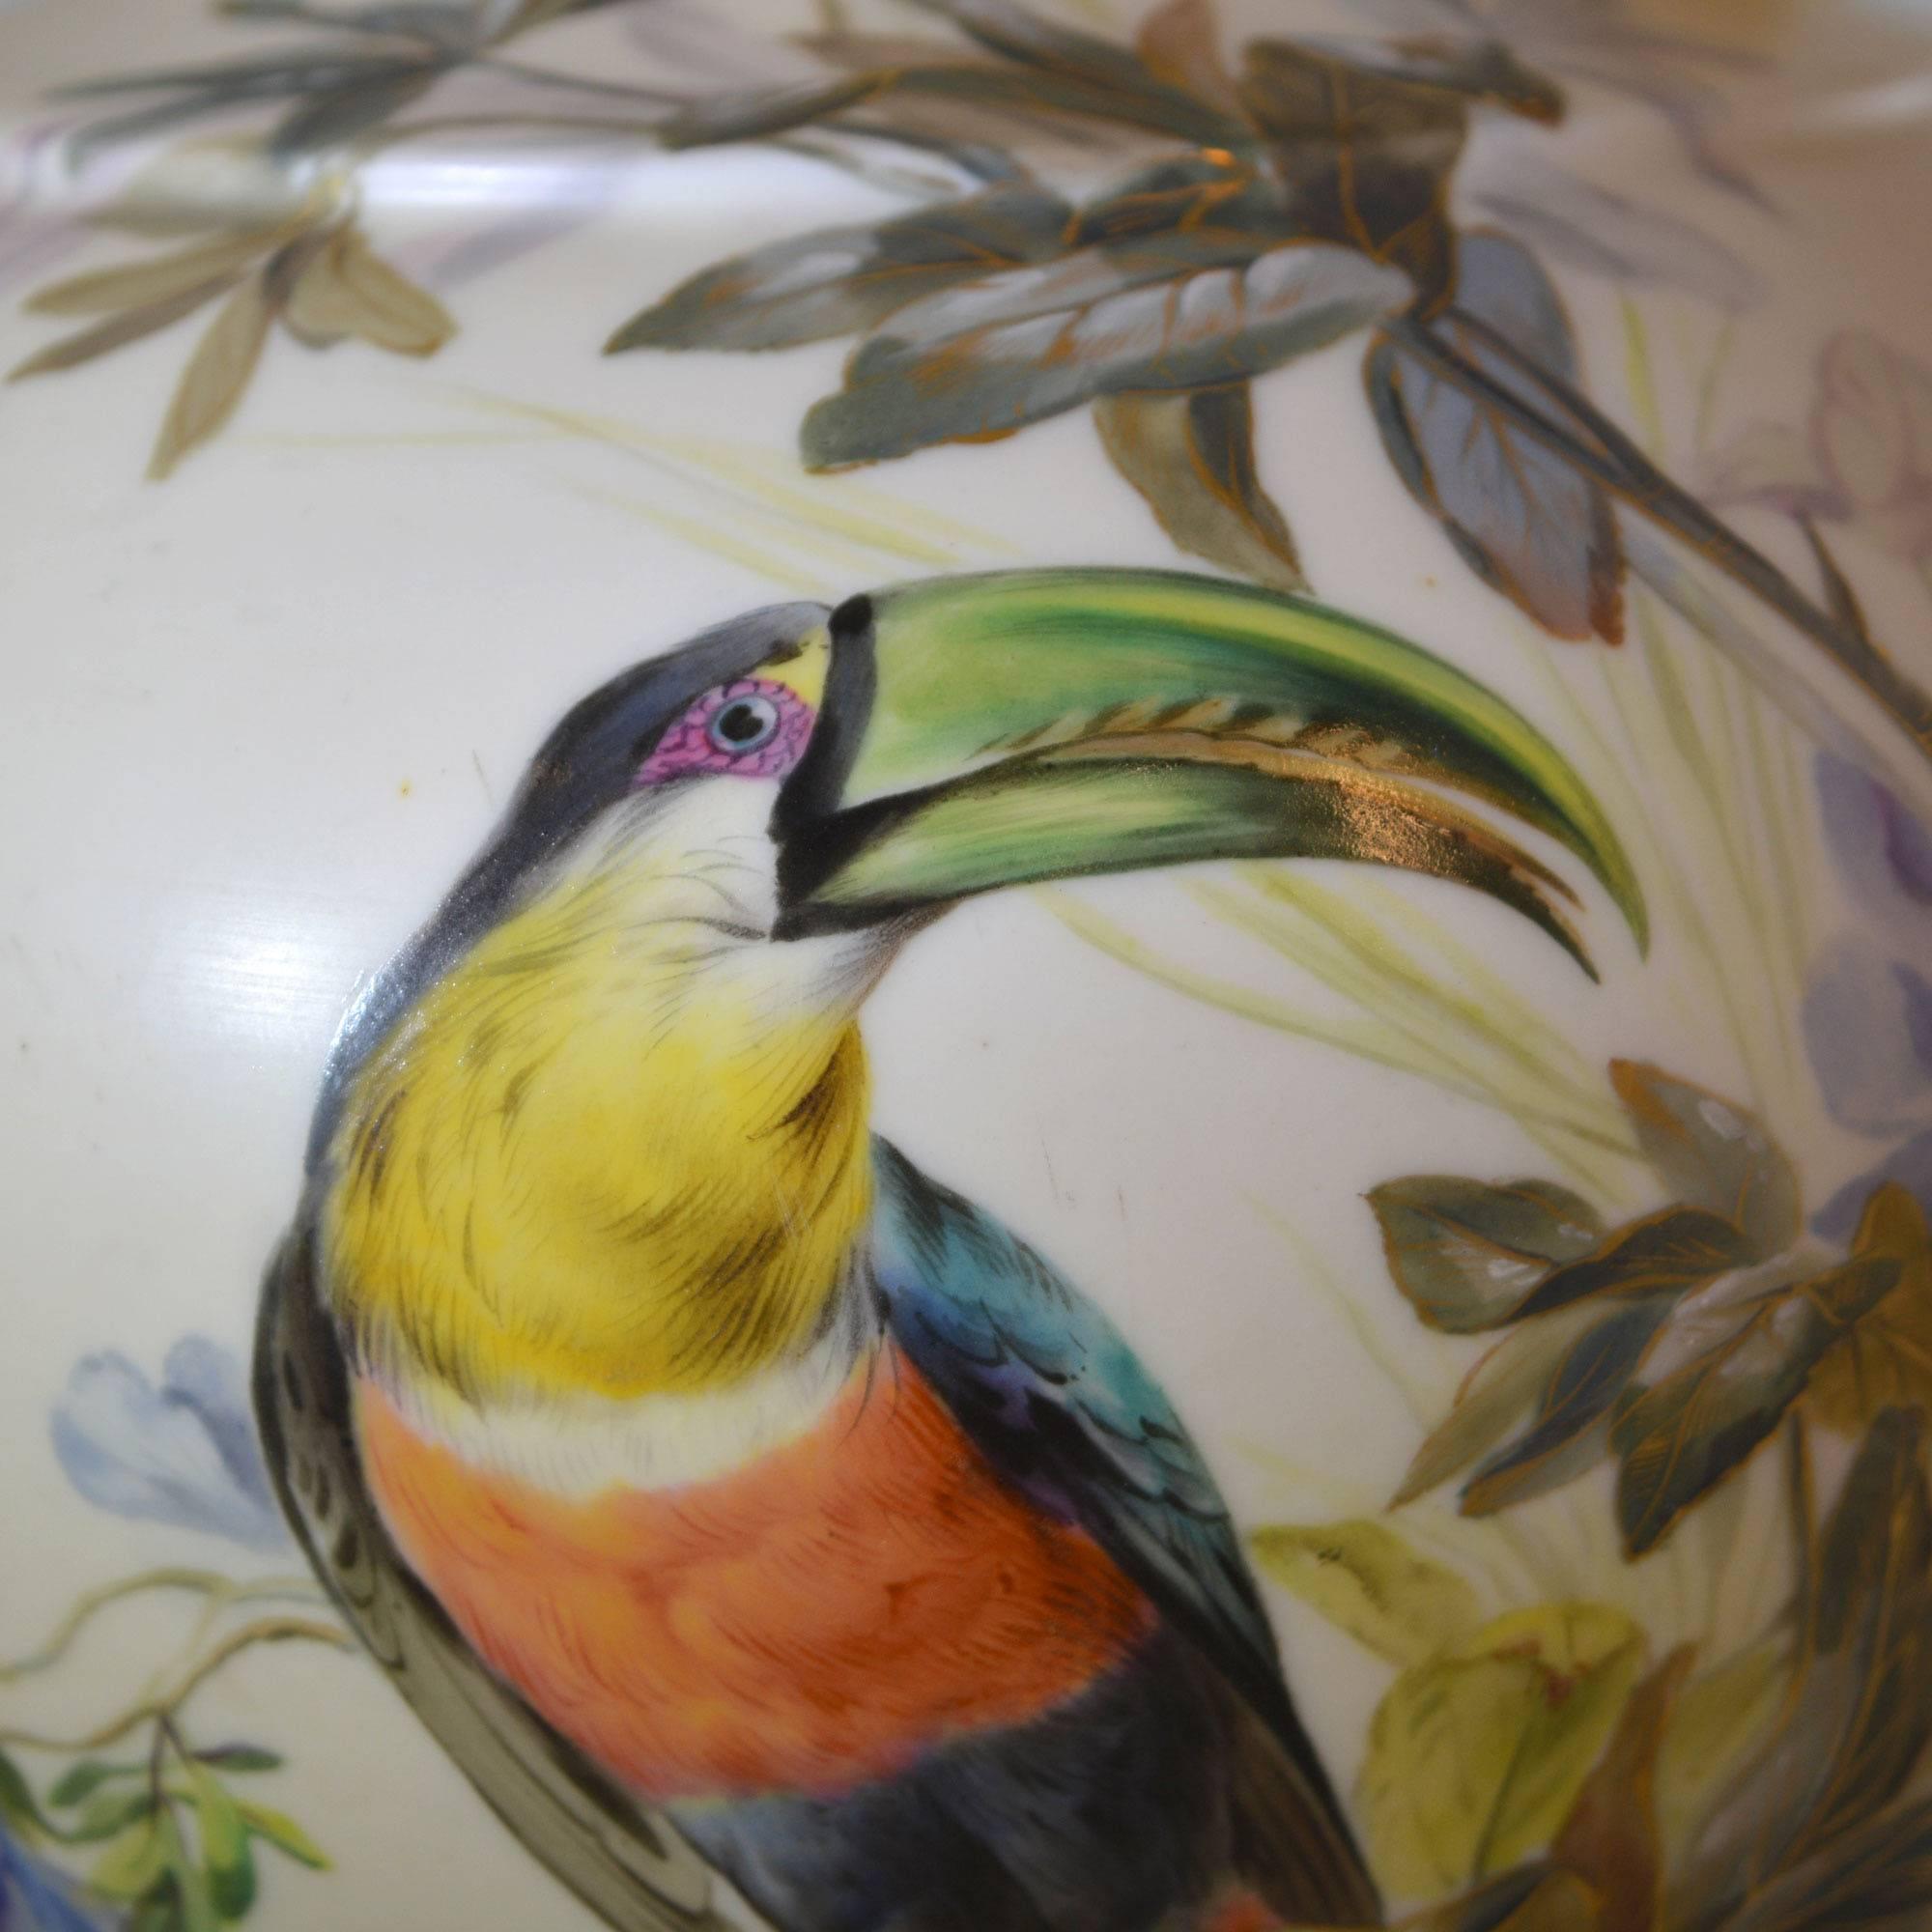 We found this amazing pitcher at a local estate sale tucked back in a corner. Once it was in the light the vibrant colors and details of the toucan and gold came to life. The artistry of the bird is spectacular. The hand painted design continues to